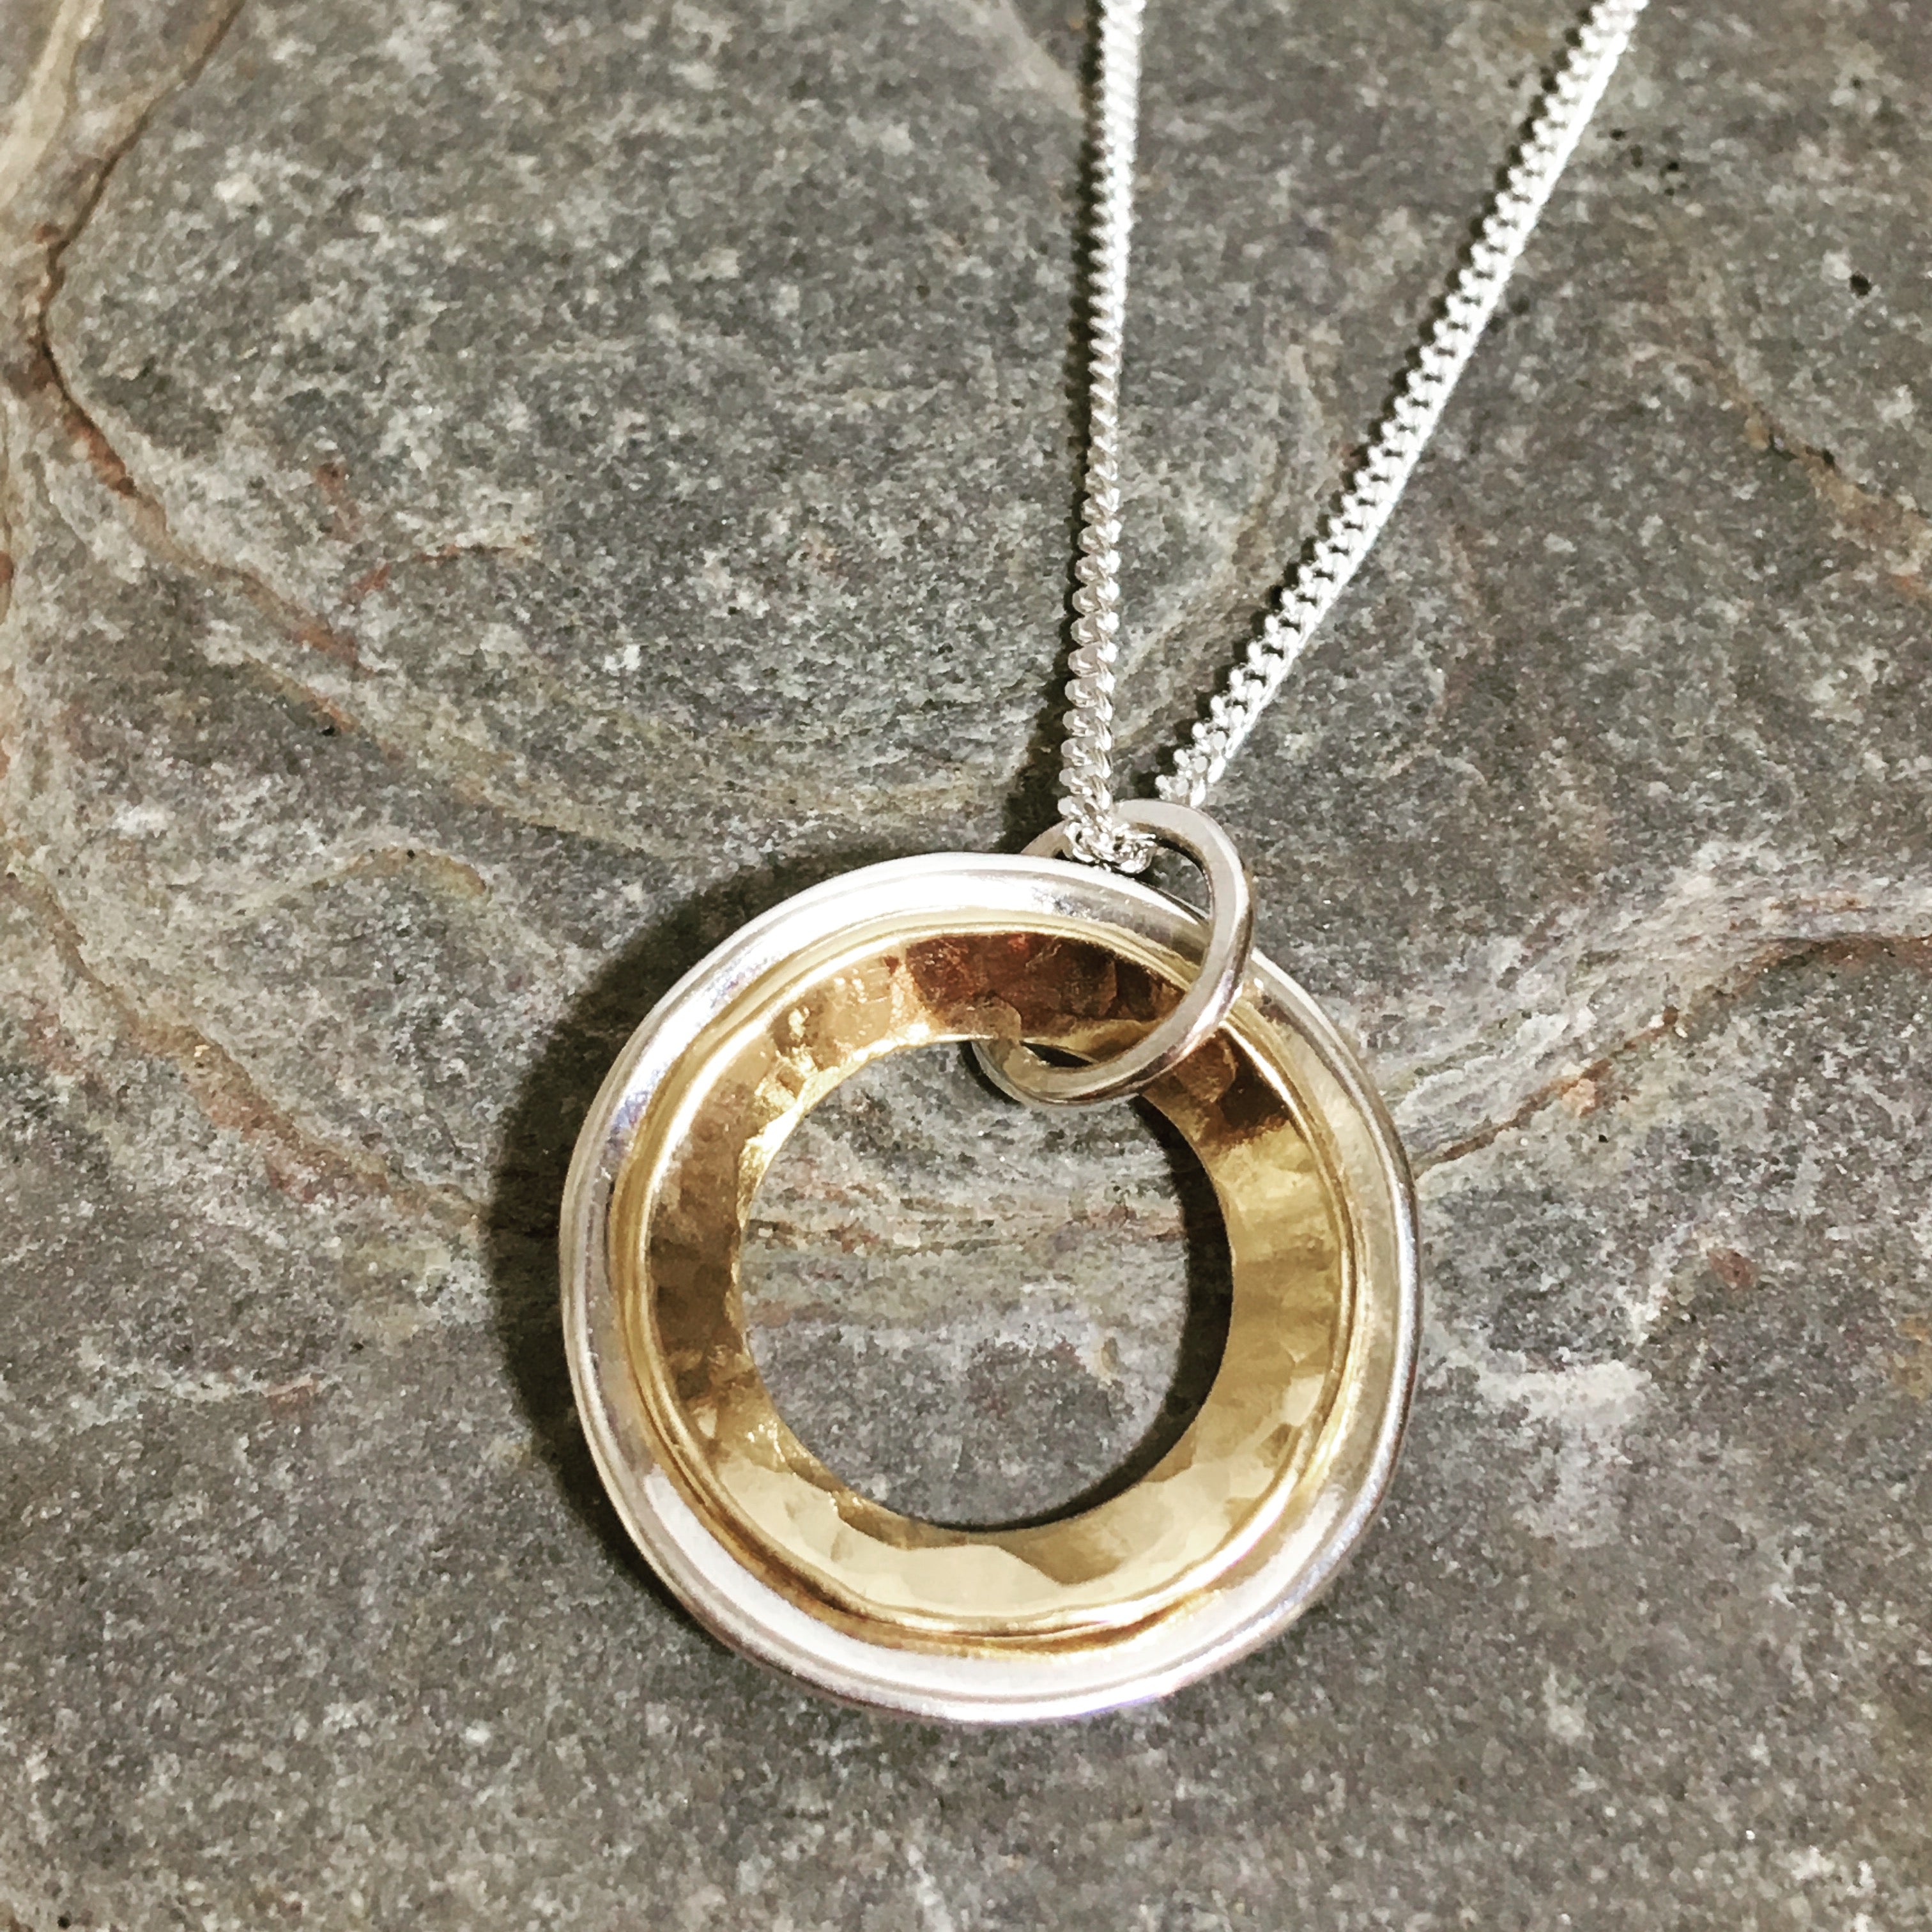 Silver and Gold domed rings necklace.